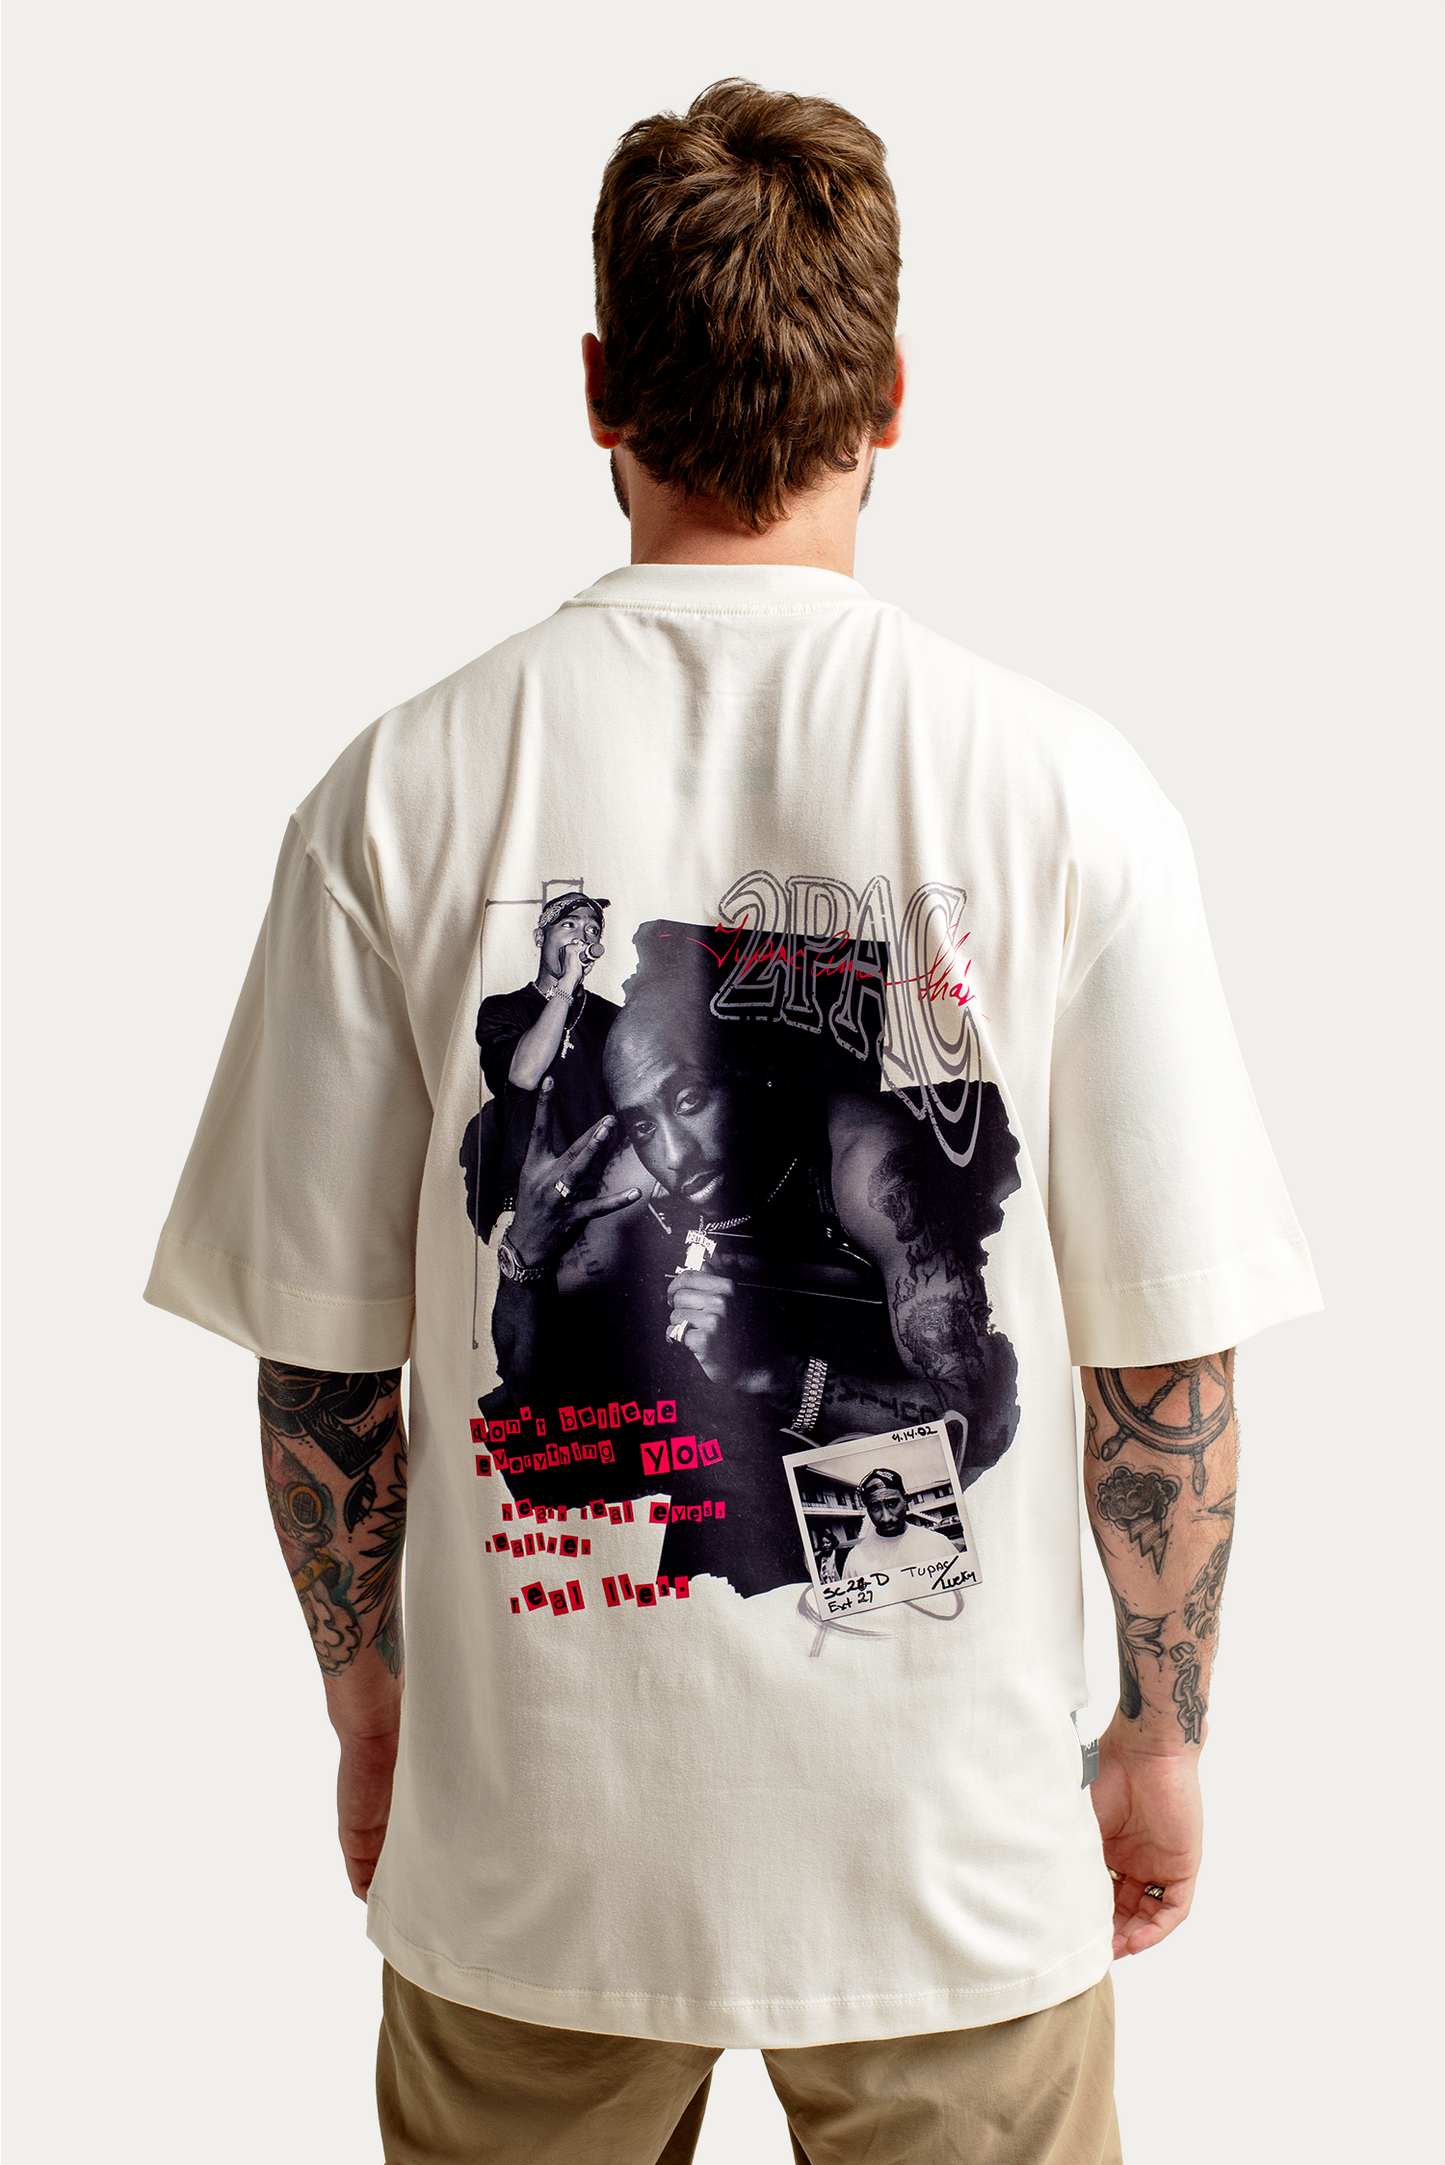 T-Shirt Over "2PAC" - Off-white